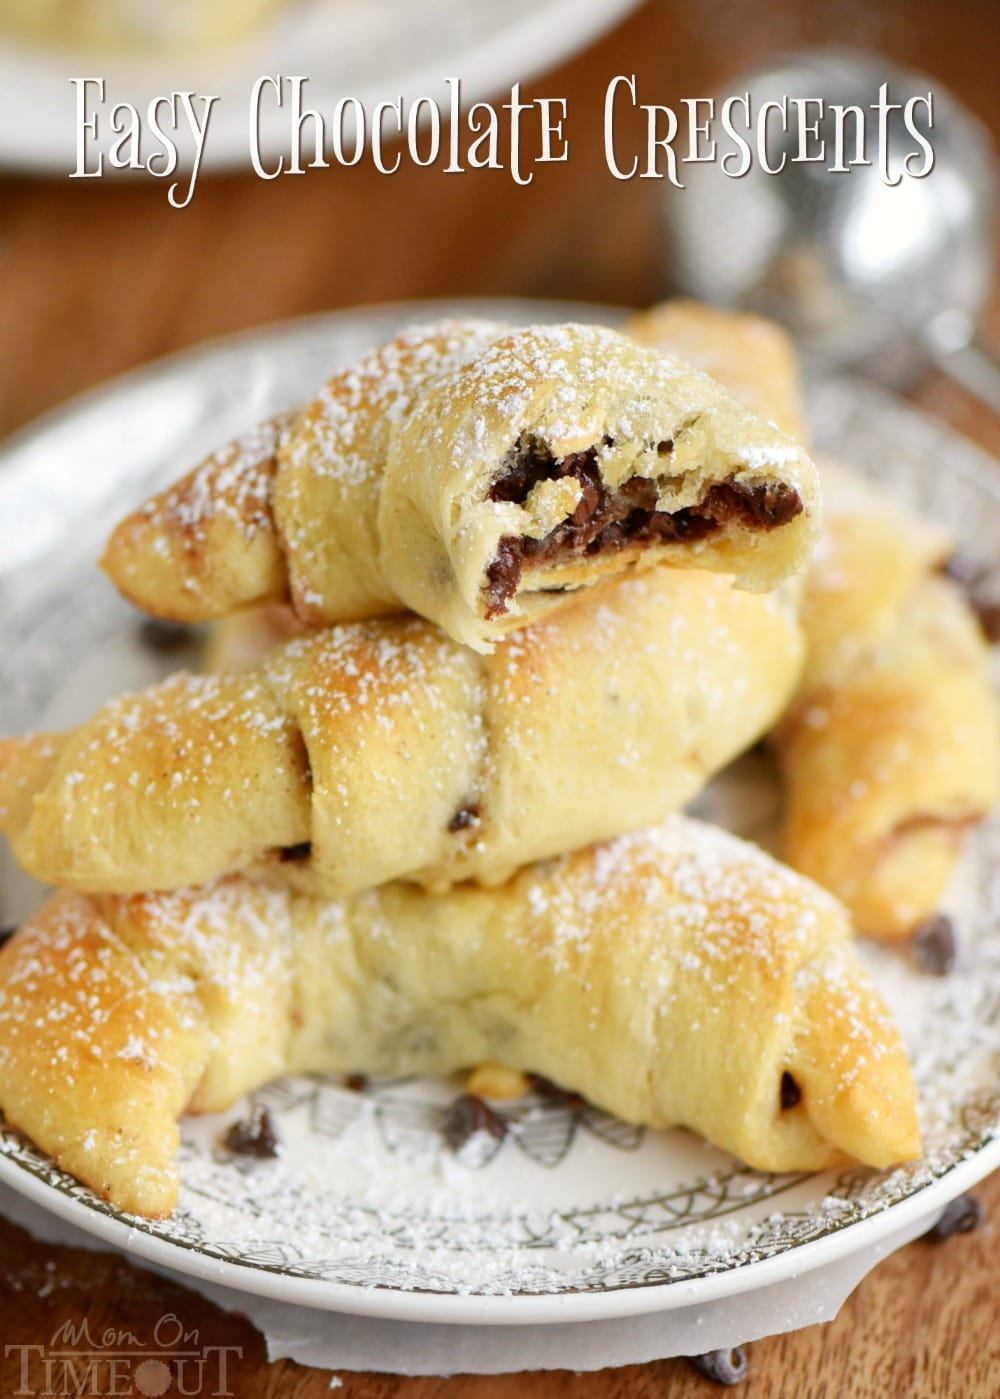 These Easy Chocolate Crescents take just minutes to prepare and use only 4 ingredients! Top with a sweet dusting of powdered sugar and you'll find them hard to resist. Great for breakfast, brunch, or dessert! // Mom On Timeout #breakfast #brunch #dessert #chocolate #easy #recipe #momontimeout